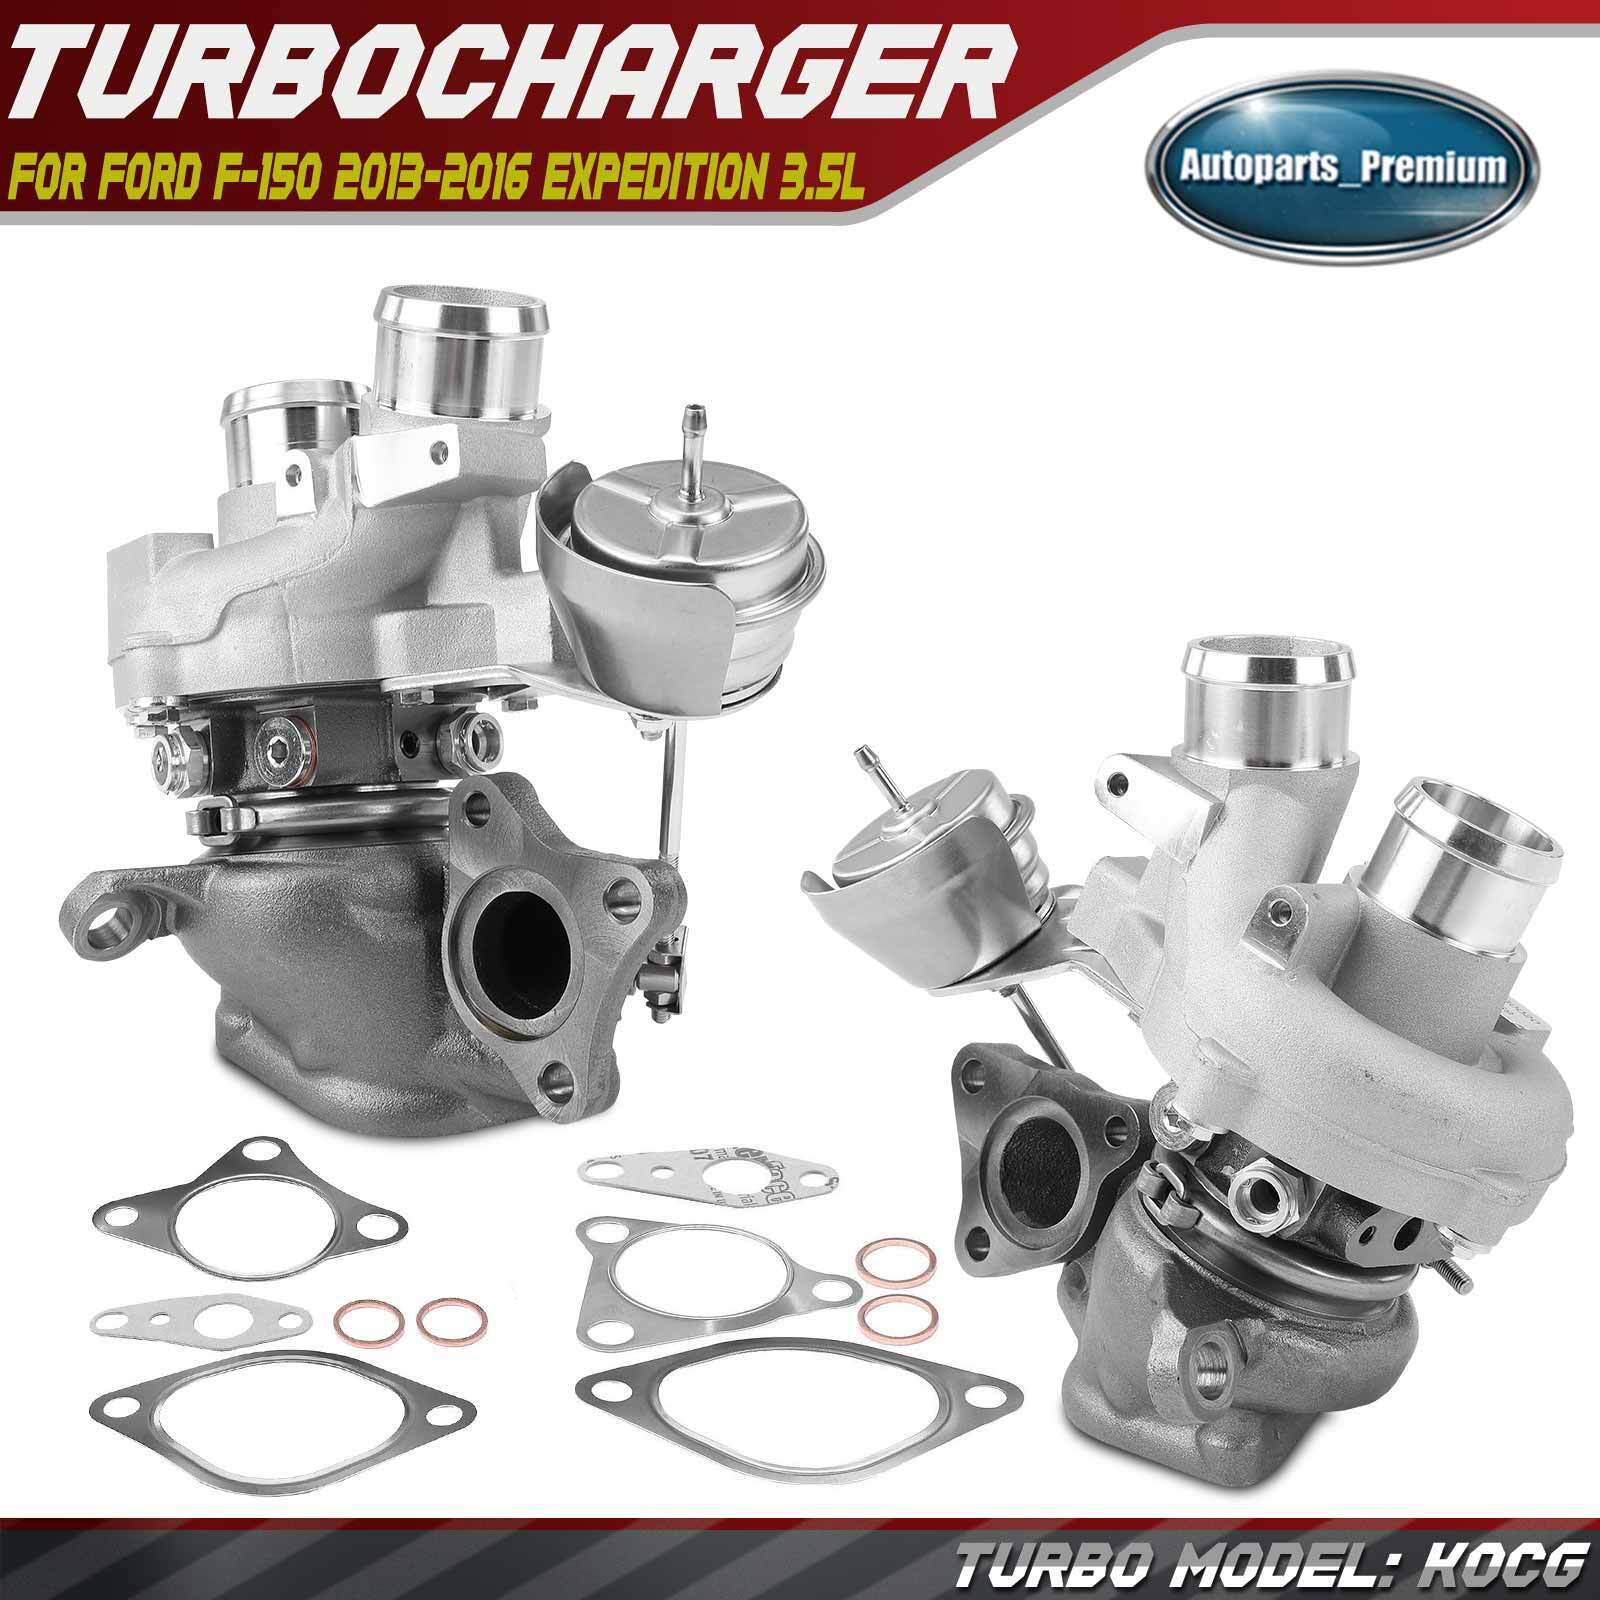 2x Left & Right Twin Turbo Turbocharger for Ford F-150 2013-2016 Expedition 3.5L